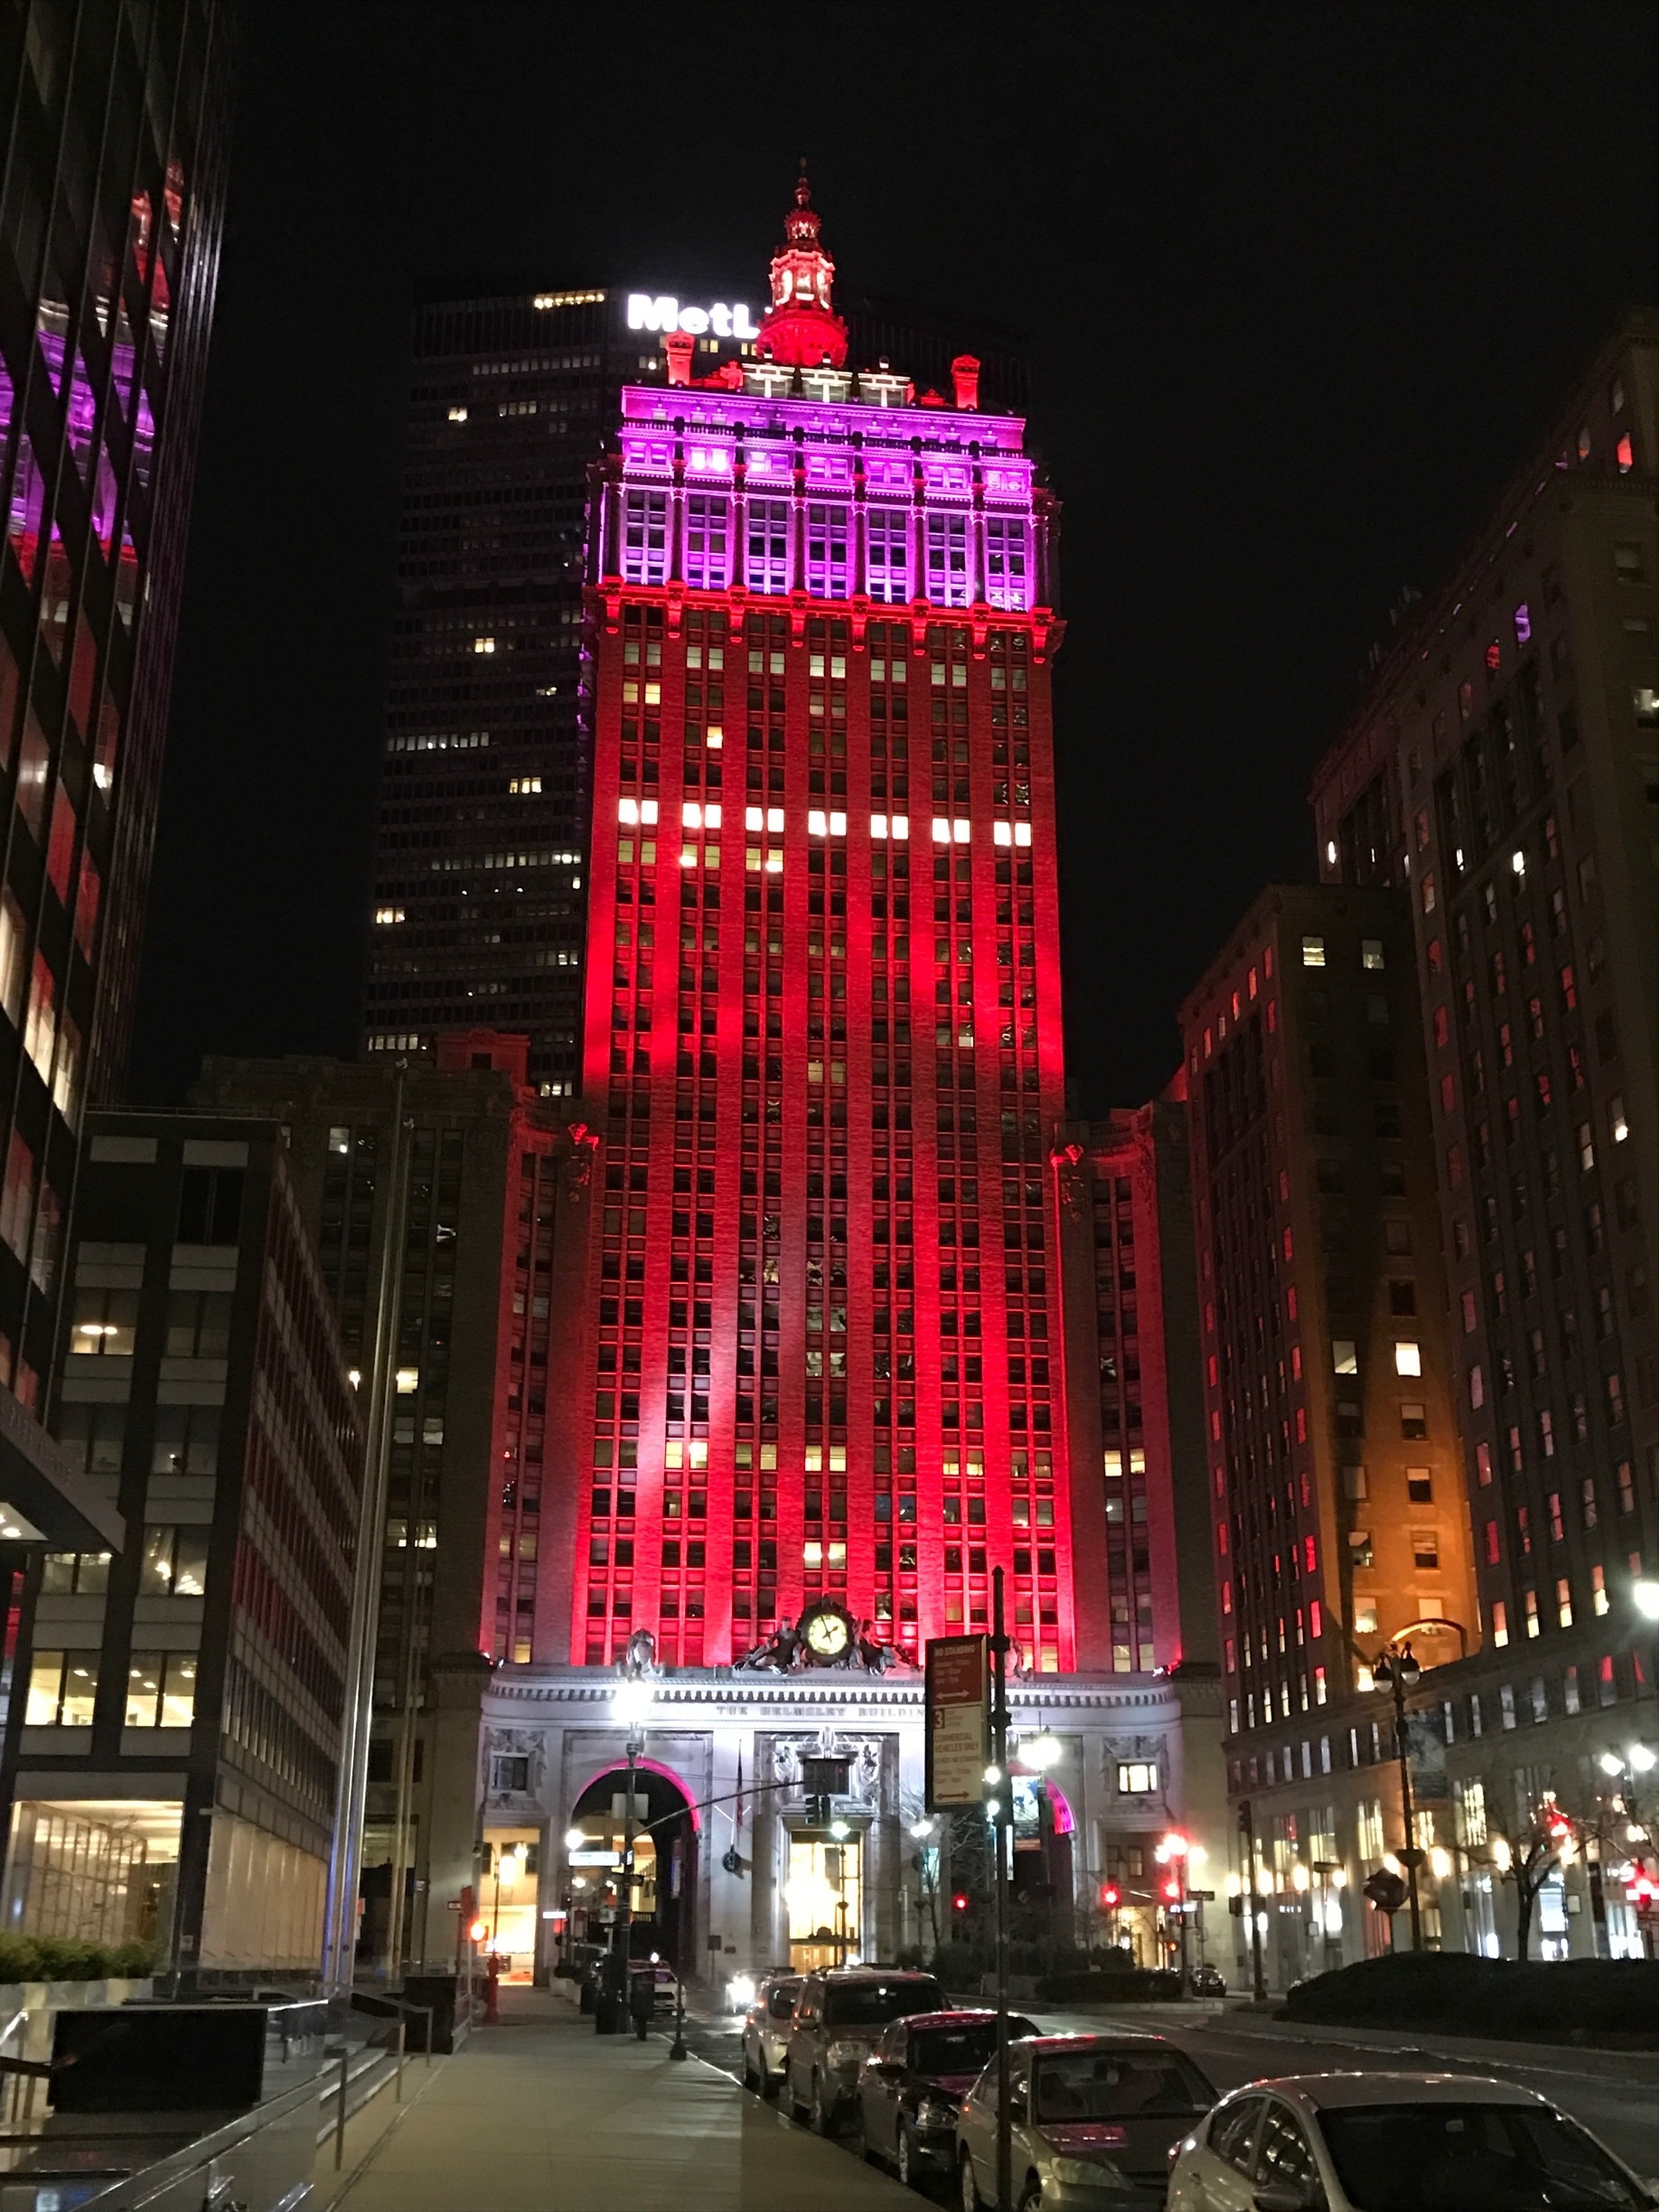 Grand central was lit up red tonight for Valentines Day!